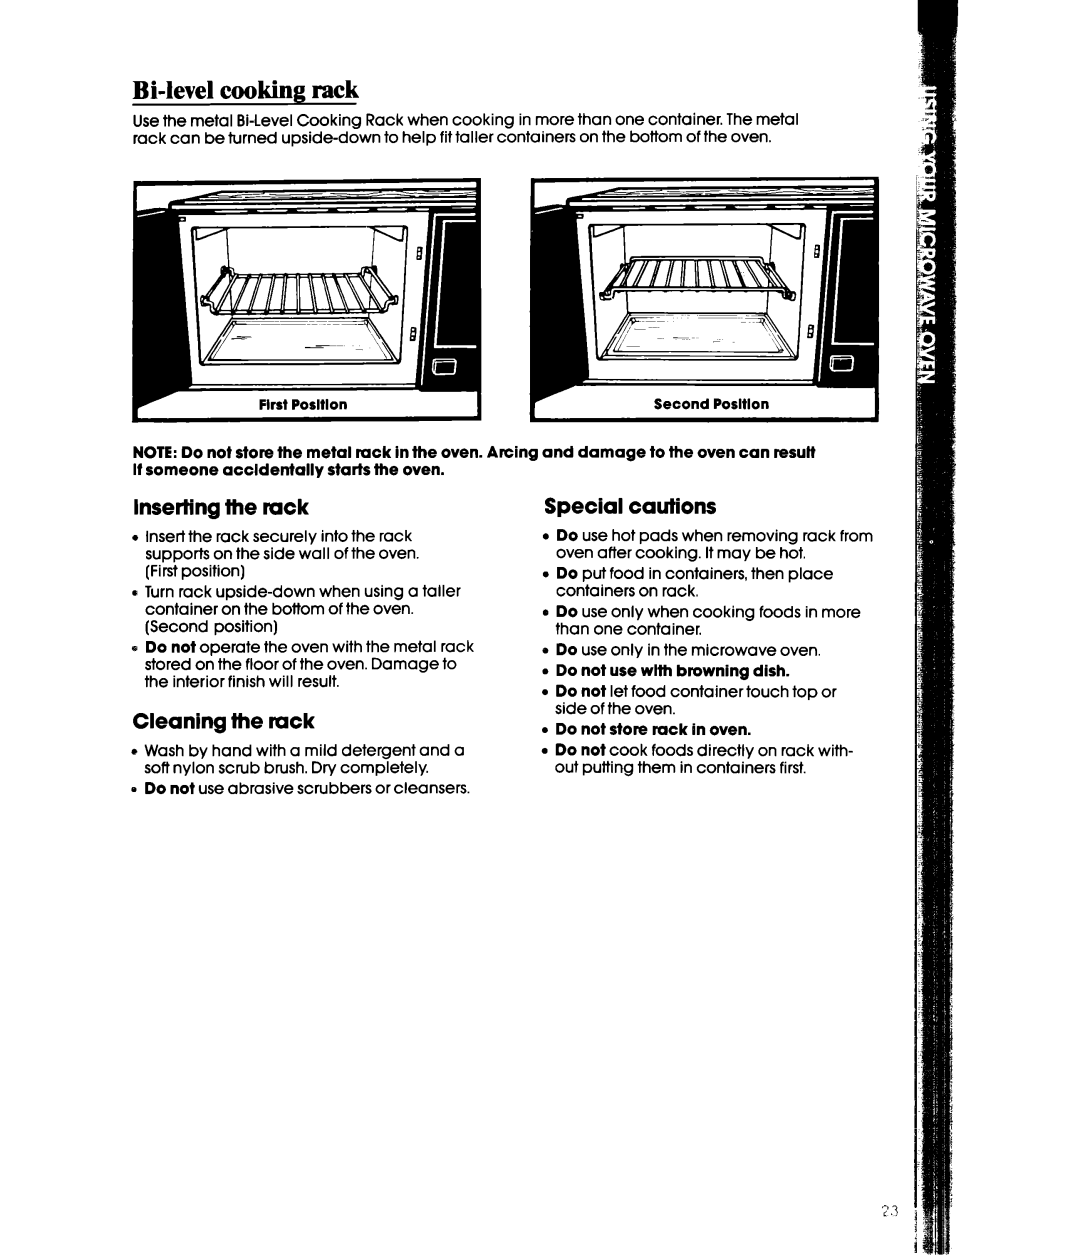 Whirlpool MW3600XW, MW3601XW manual Bi-levelcooking rack, Inserting the rack, Cleaning the rack, Special cautions 